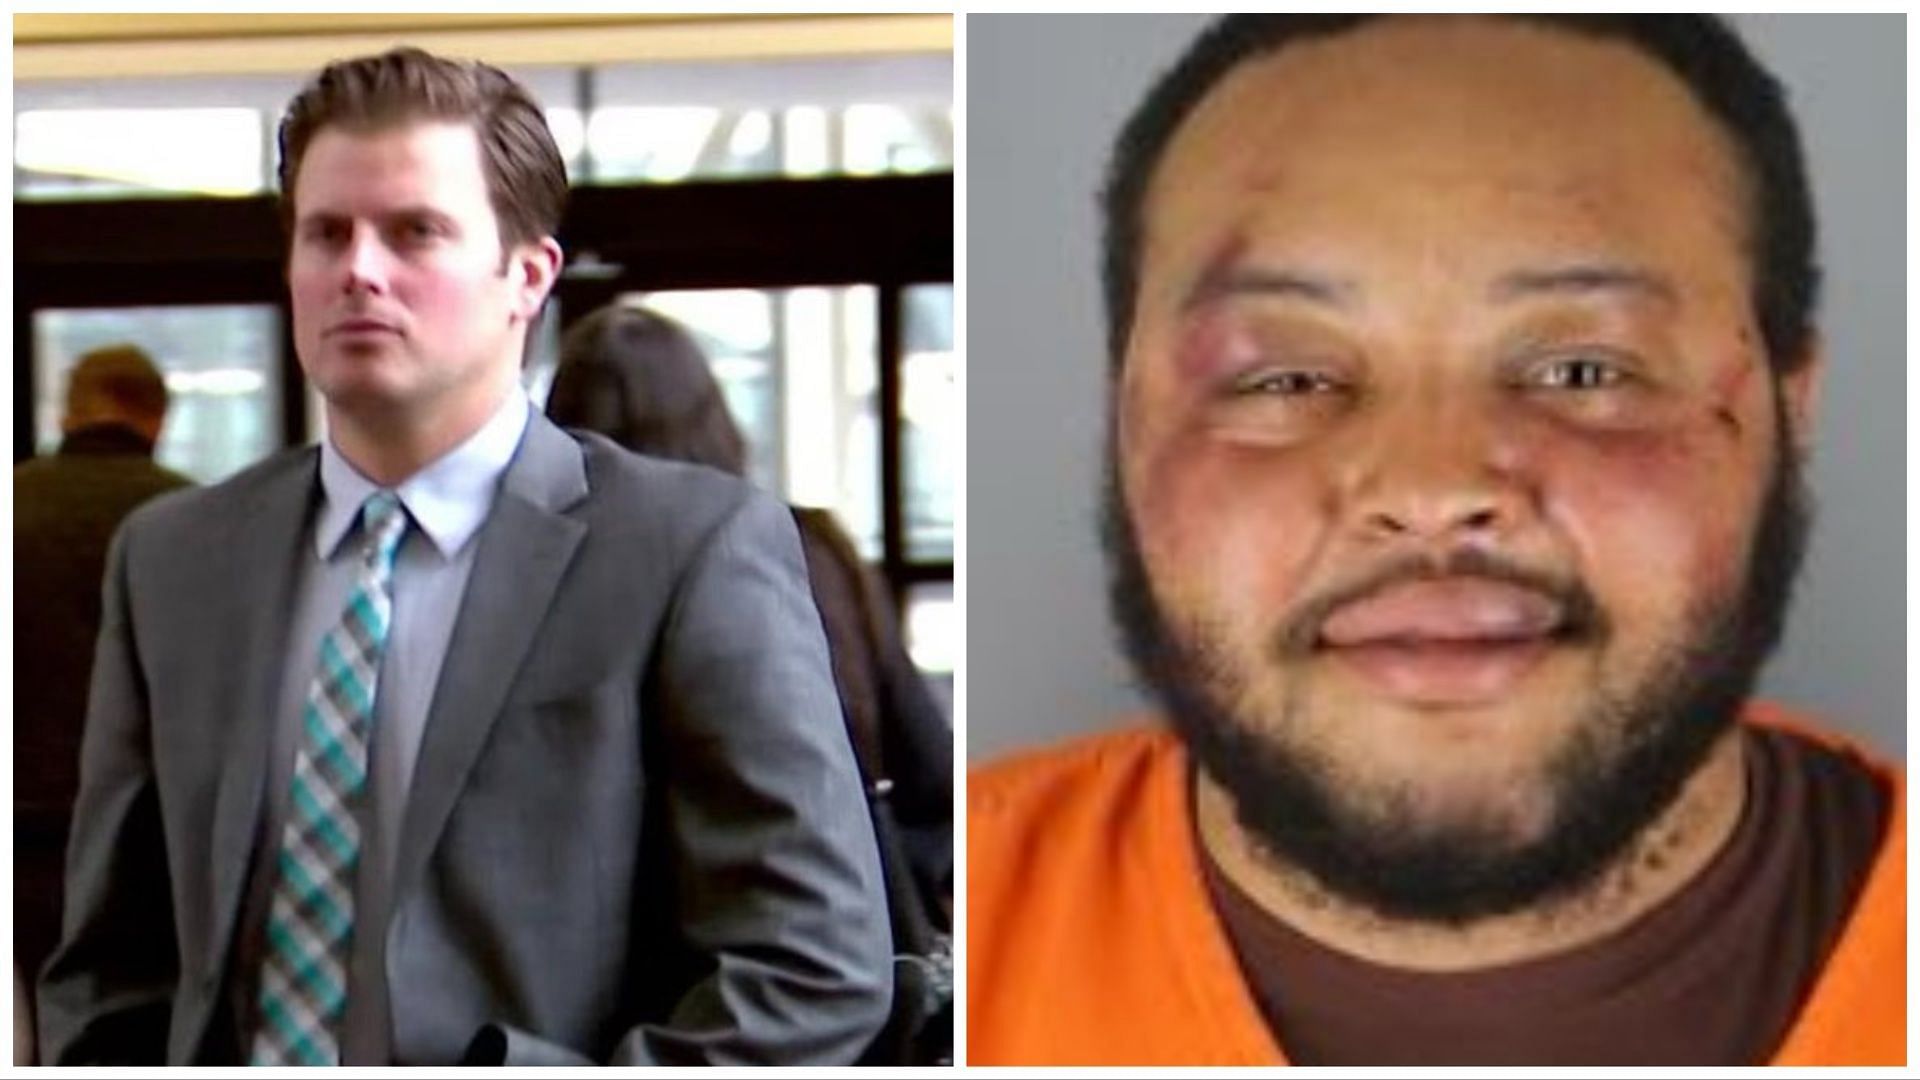 Justin Stetson (left) pleaded guilty to having assaulted Jaleel Stallings (right) back in 2020, (Images via dara faye/Twitter)